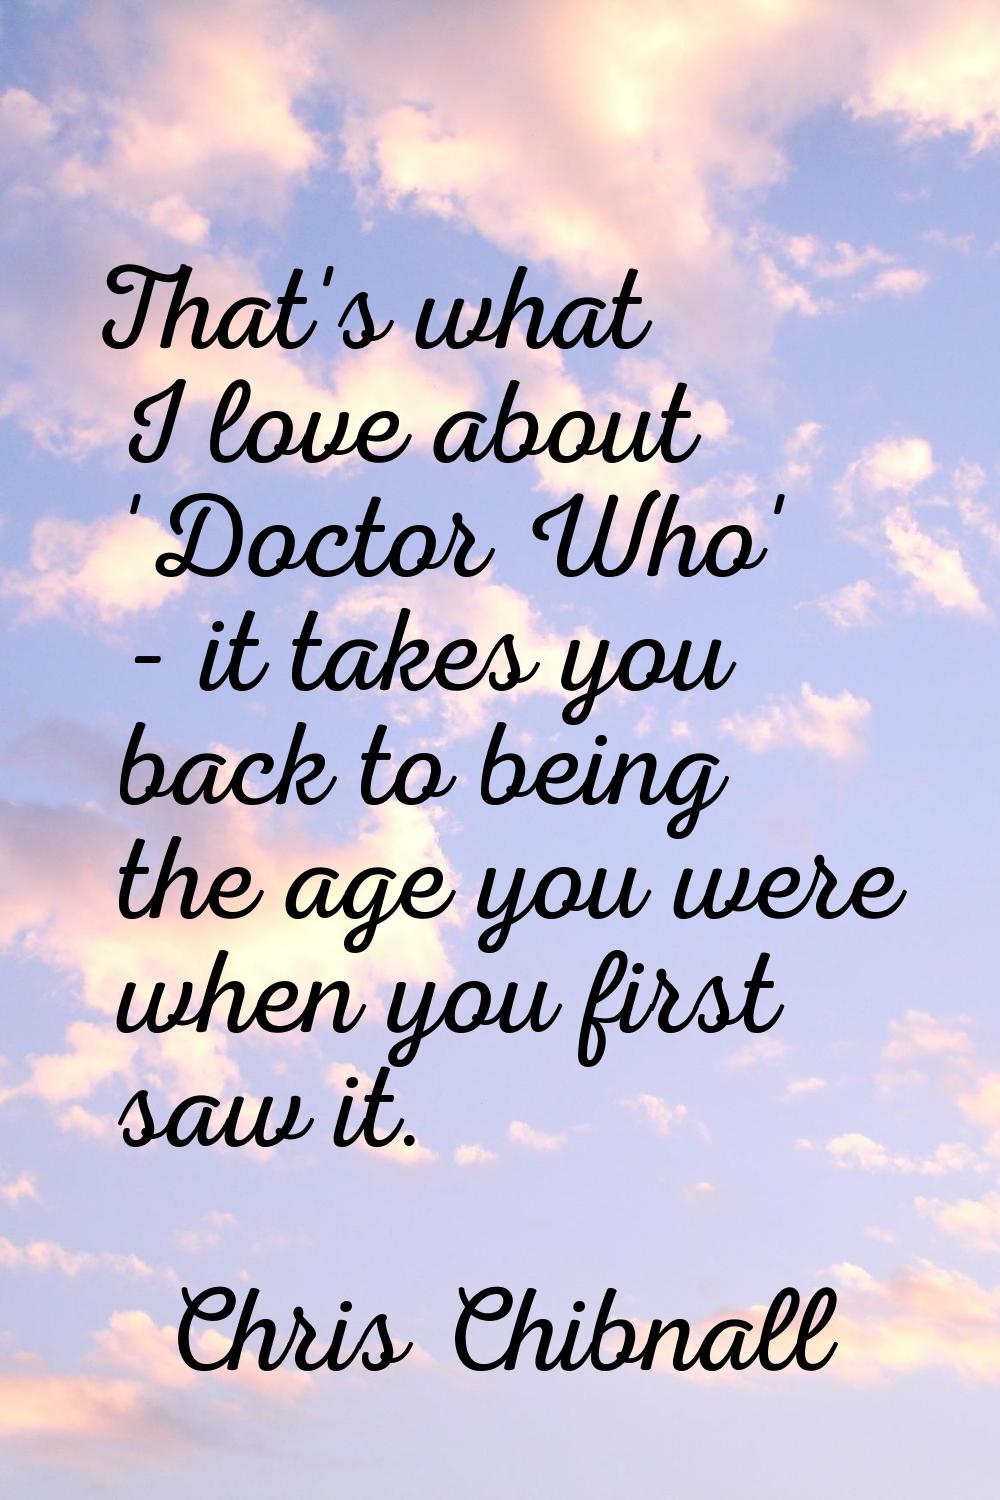 That's what I love about 'Doctor Who' - it takes you back to being the age you were when you first 